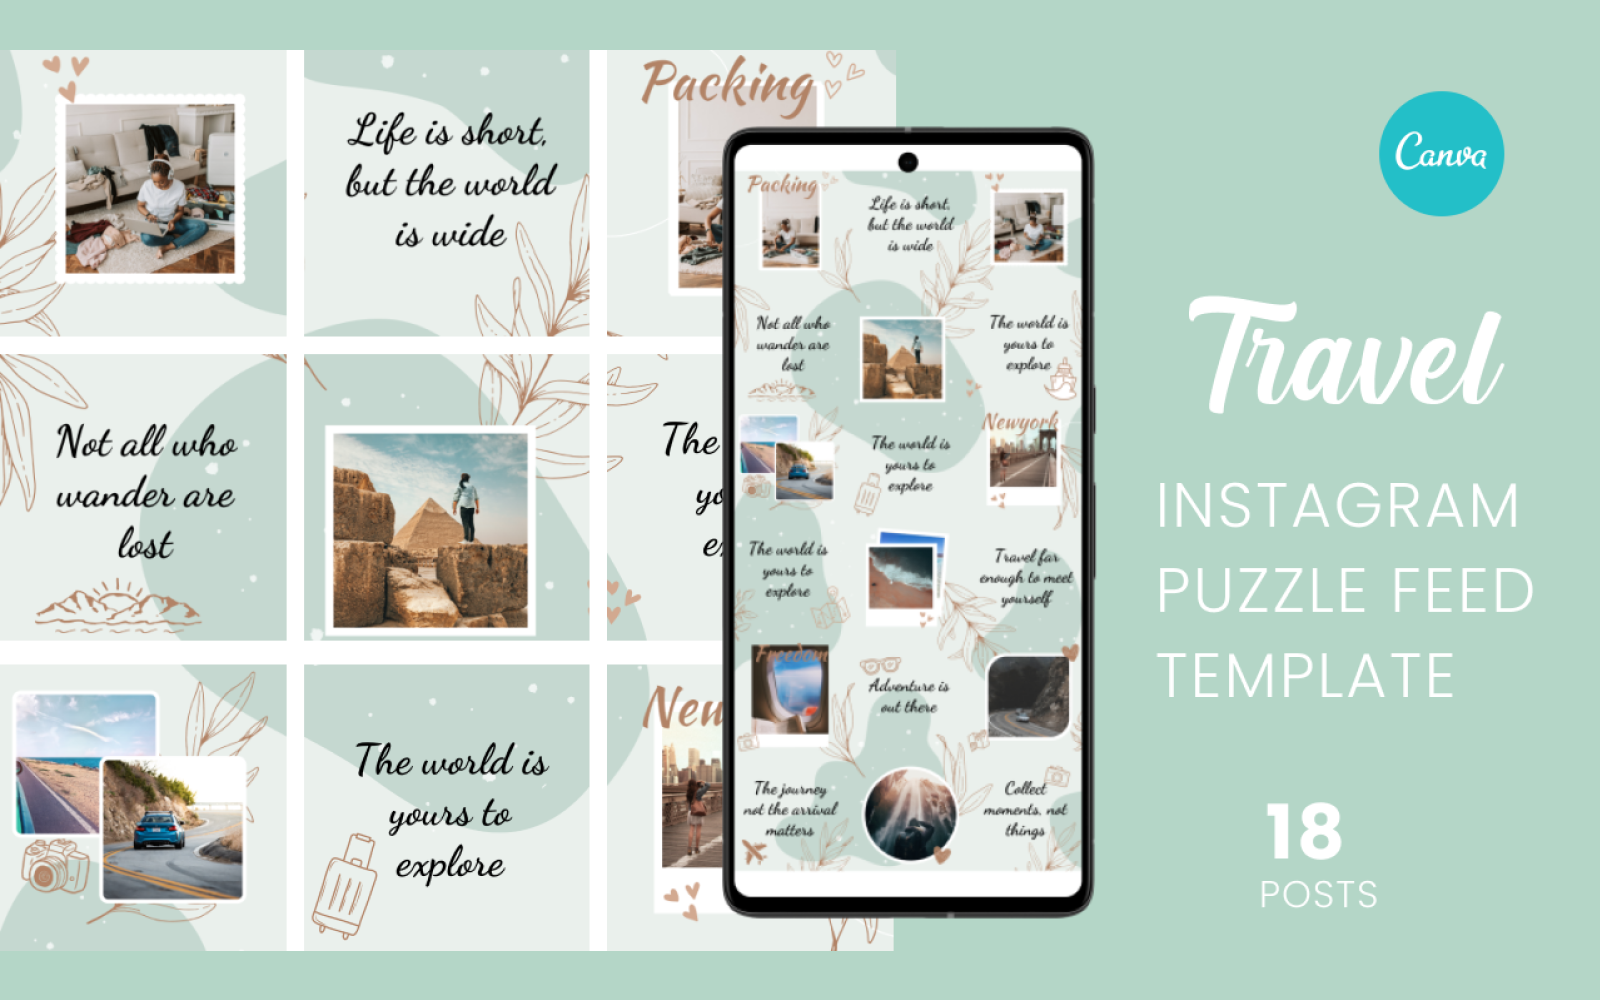 Travel Instagram Puzzle Feed Canva Template - 18 Instagram Posts